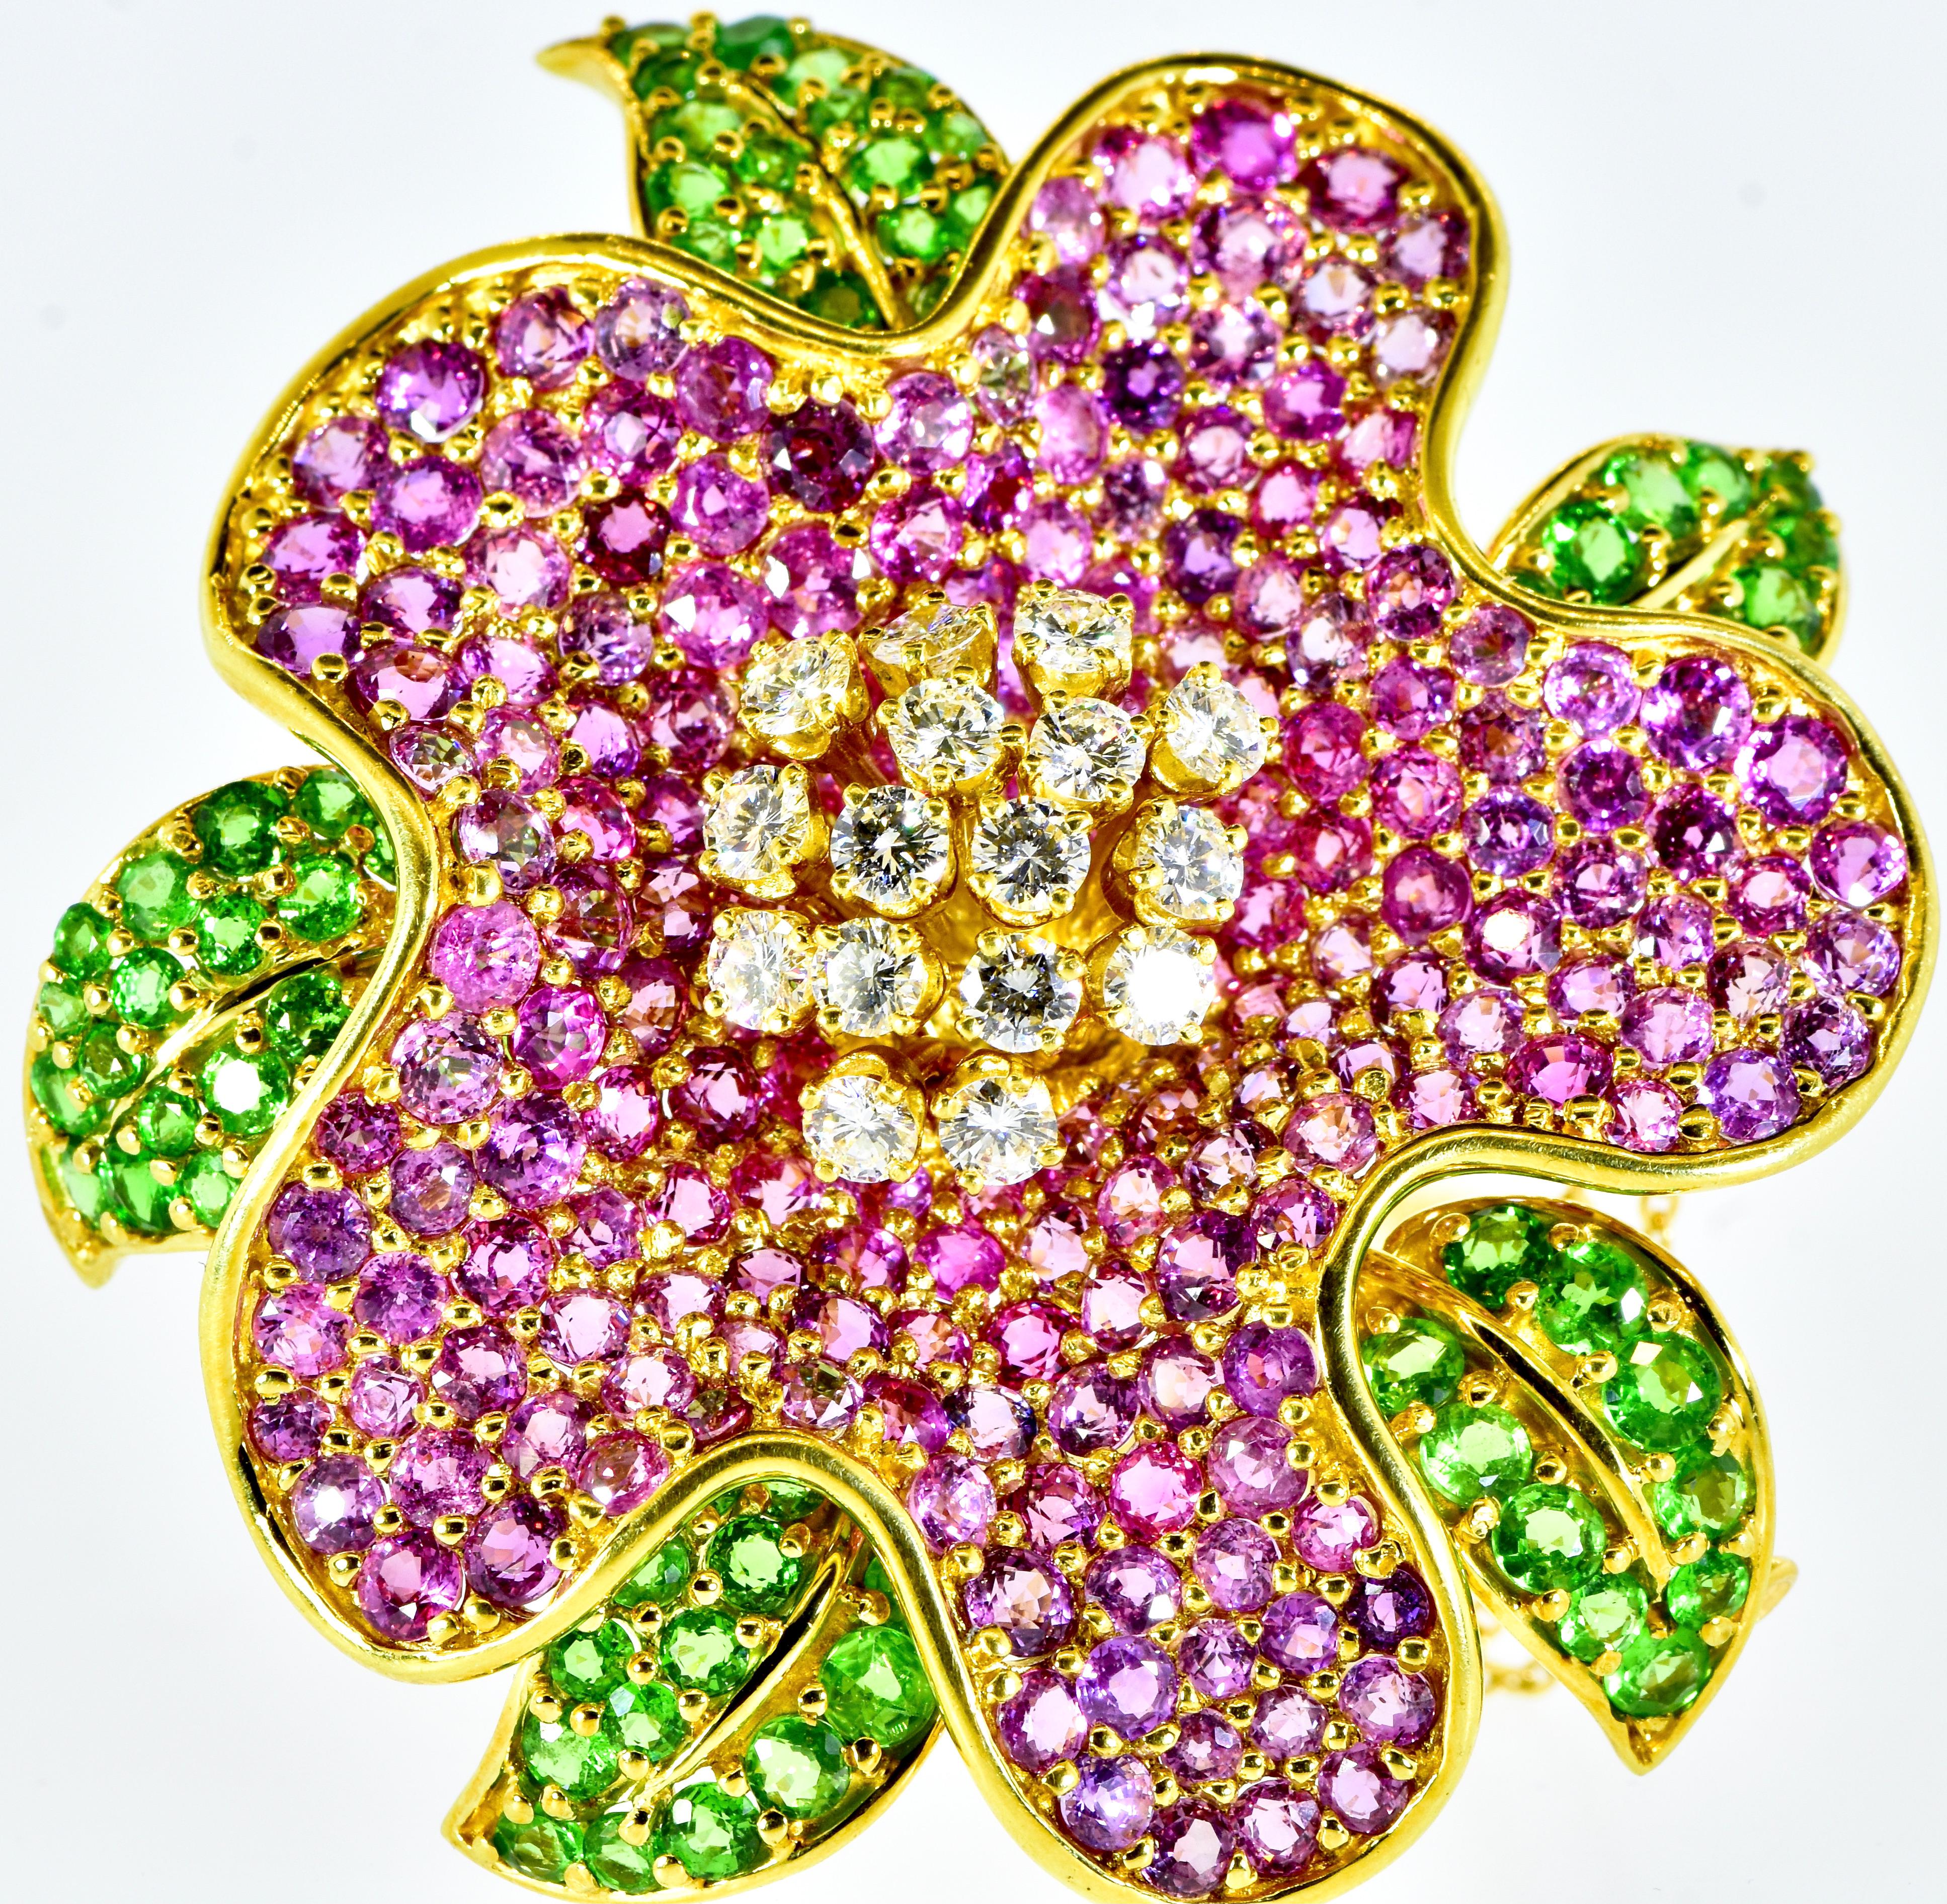 Jean Vitau pin and pendant of a large exotic flower.  Jean Vitau began designing jewelry in the last quarter of the 20th century in Paris. He moved to New York and became a leader in jewelry design. He worked for Tiffany and also designed pieces